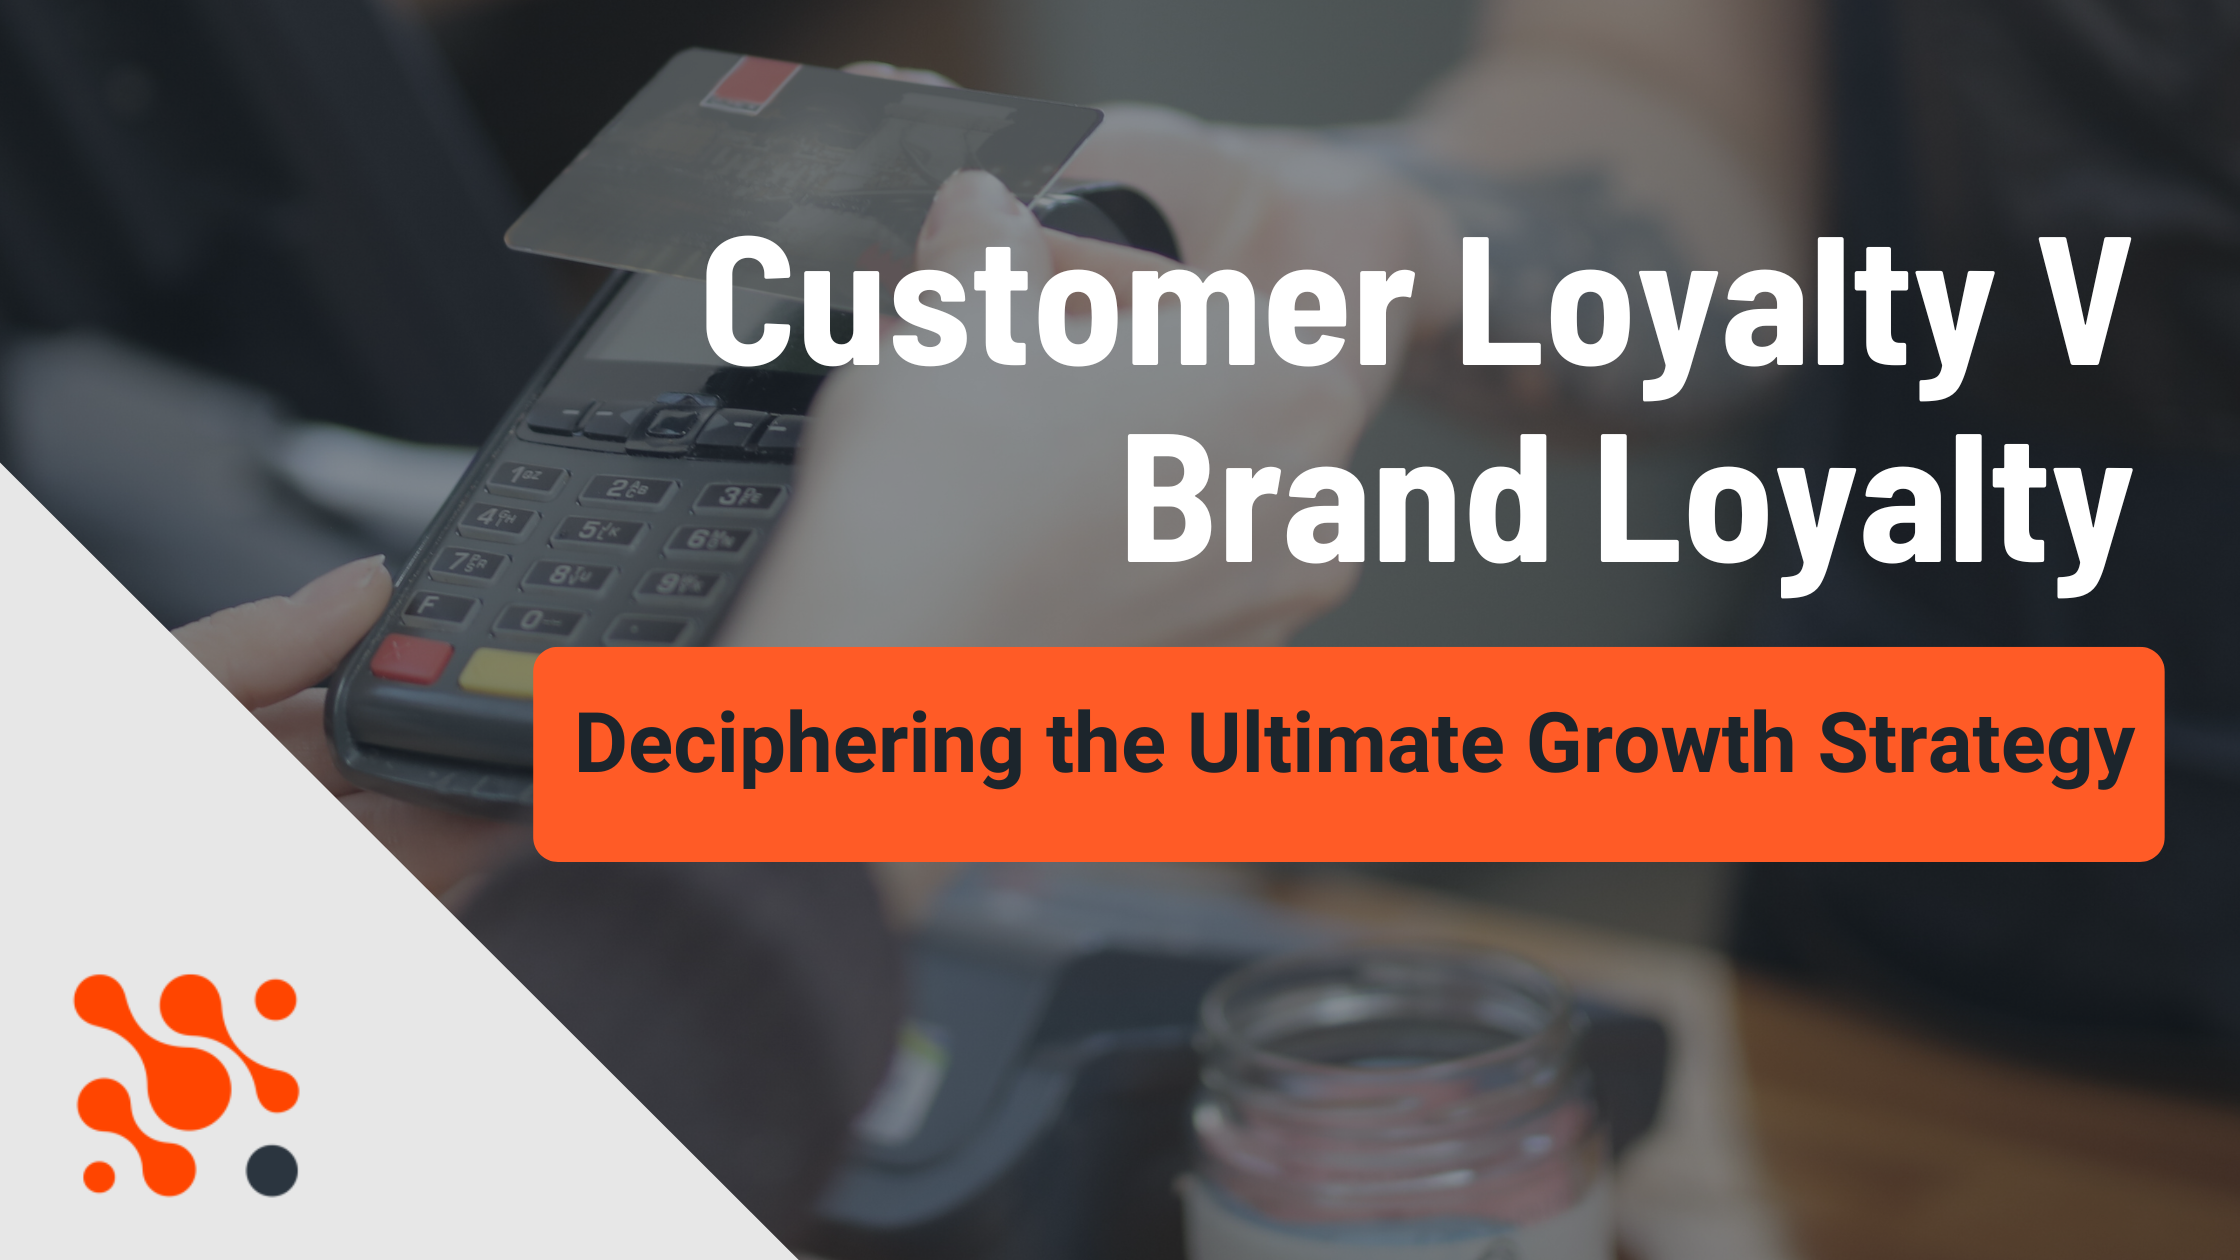 Customer Loyalty vs. Brand Loyalty: Deciphering the Ultimate Growth Strategy